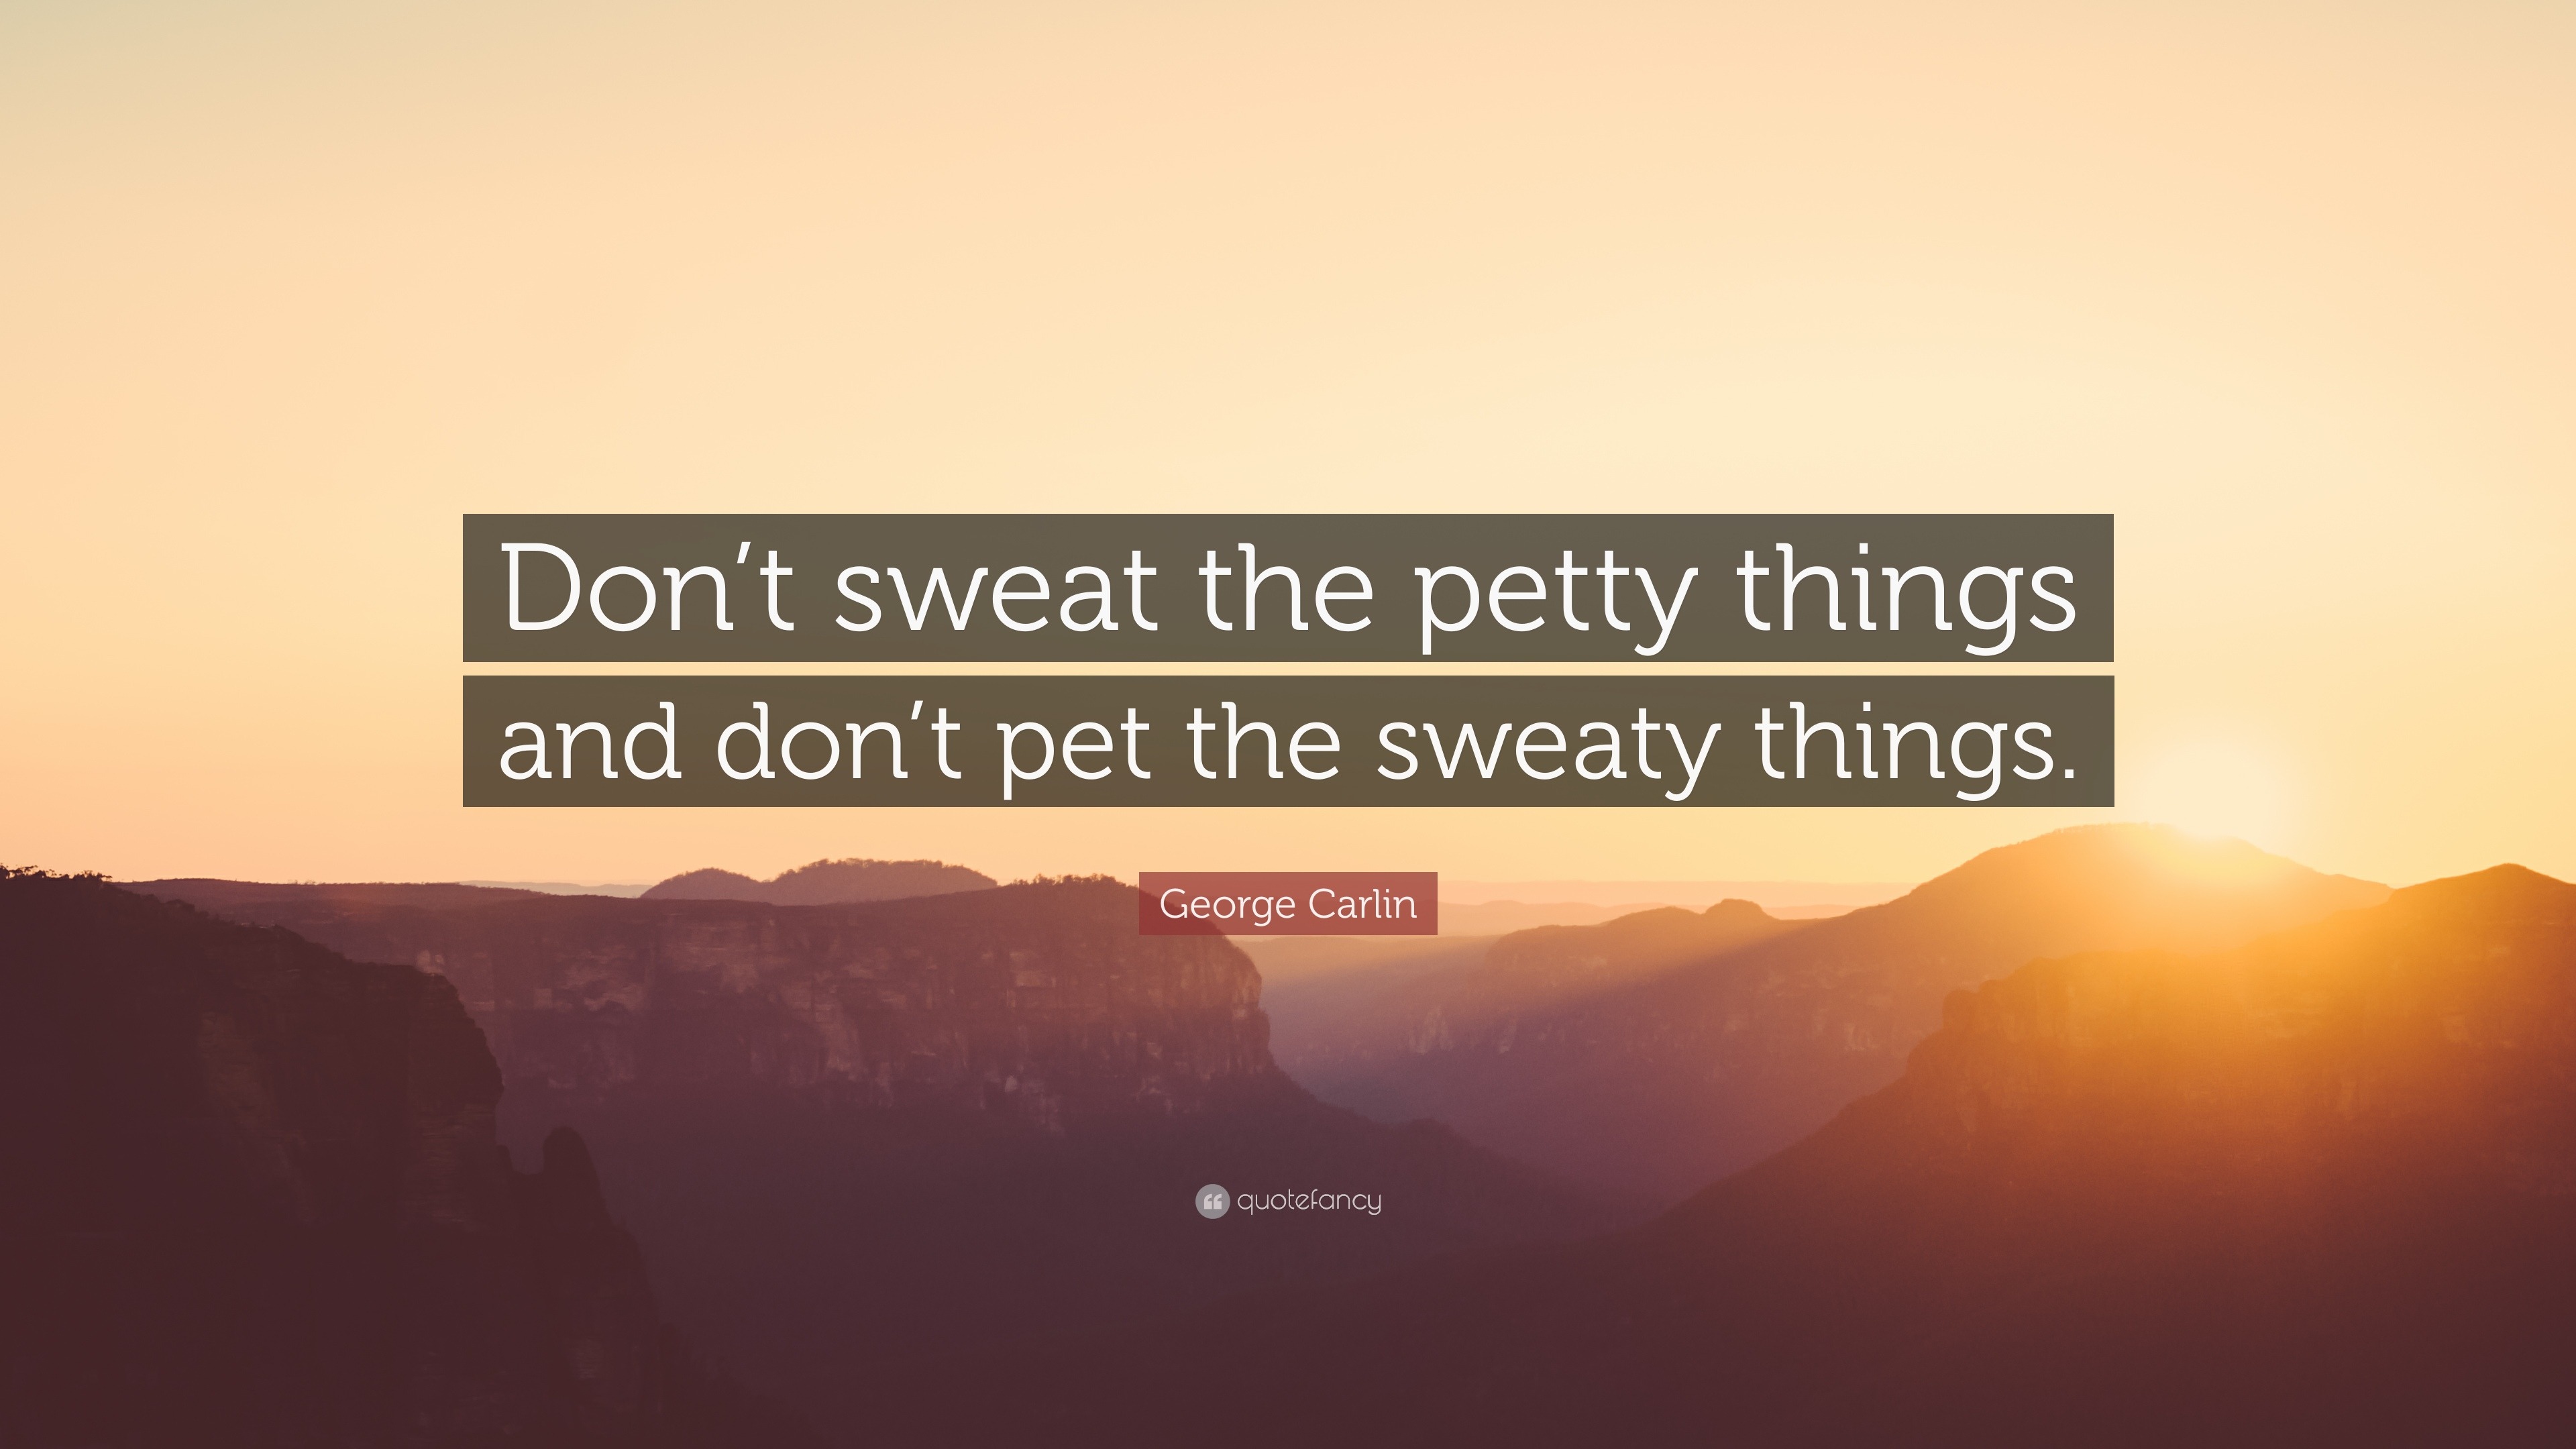 George Carlin Quote: “Don't sweat the petty things and don't pet the sweaty  things.”